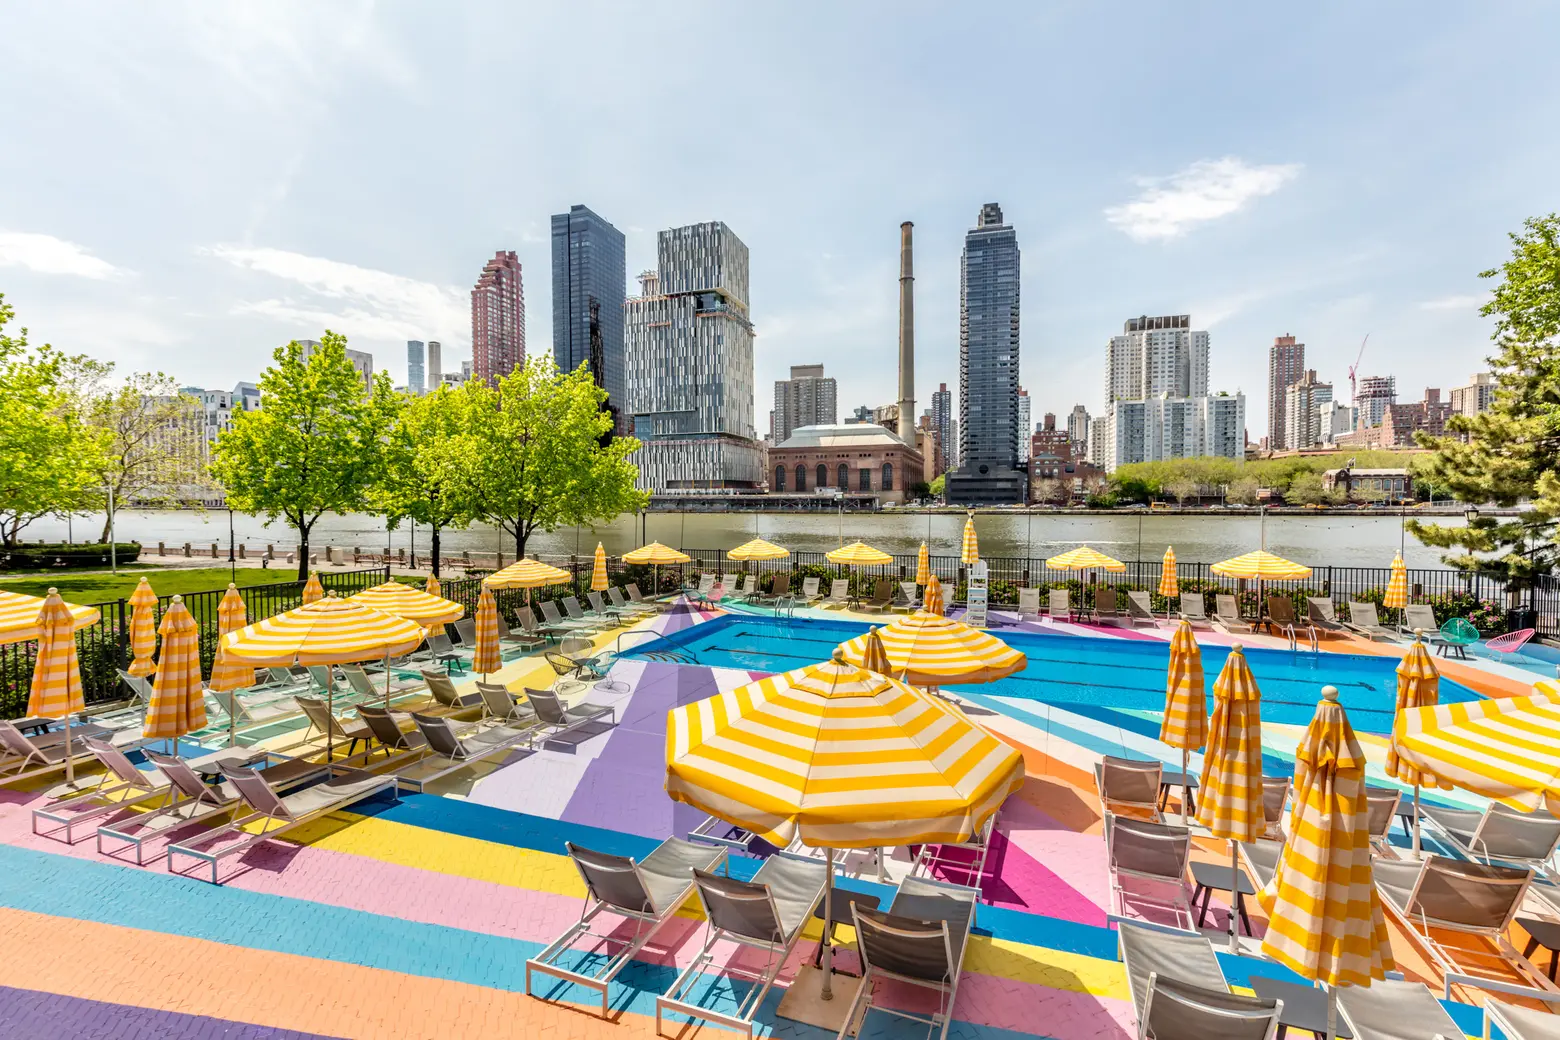 Roosevelt Island’s Manhattan Park pool transforms into a technicolor dreamscape for the summer